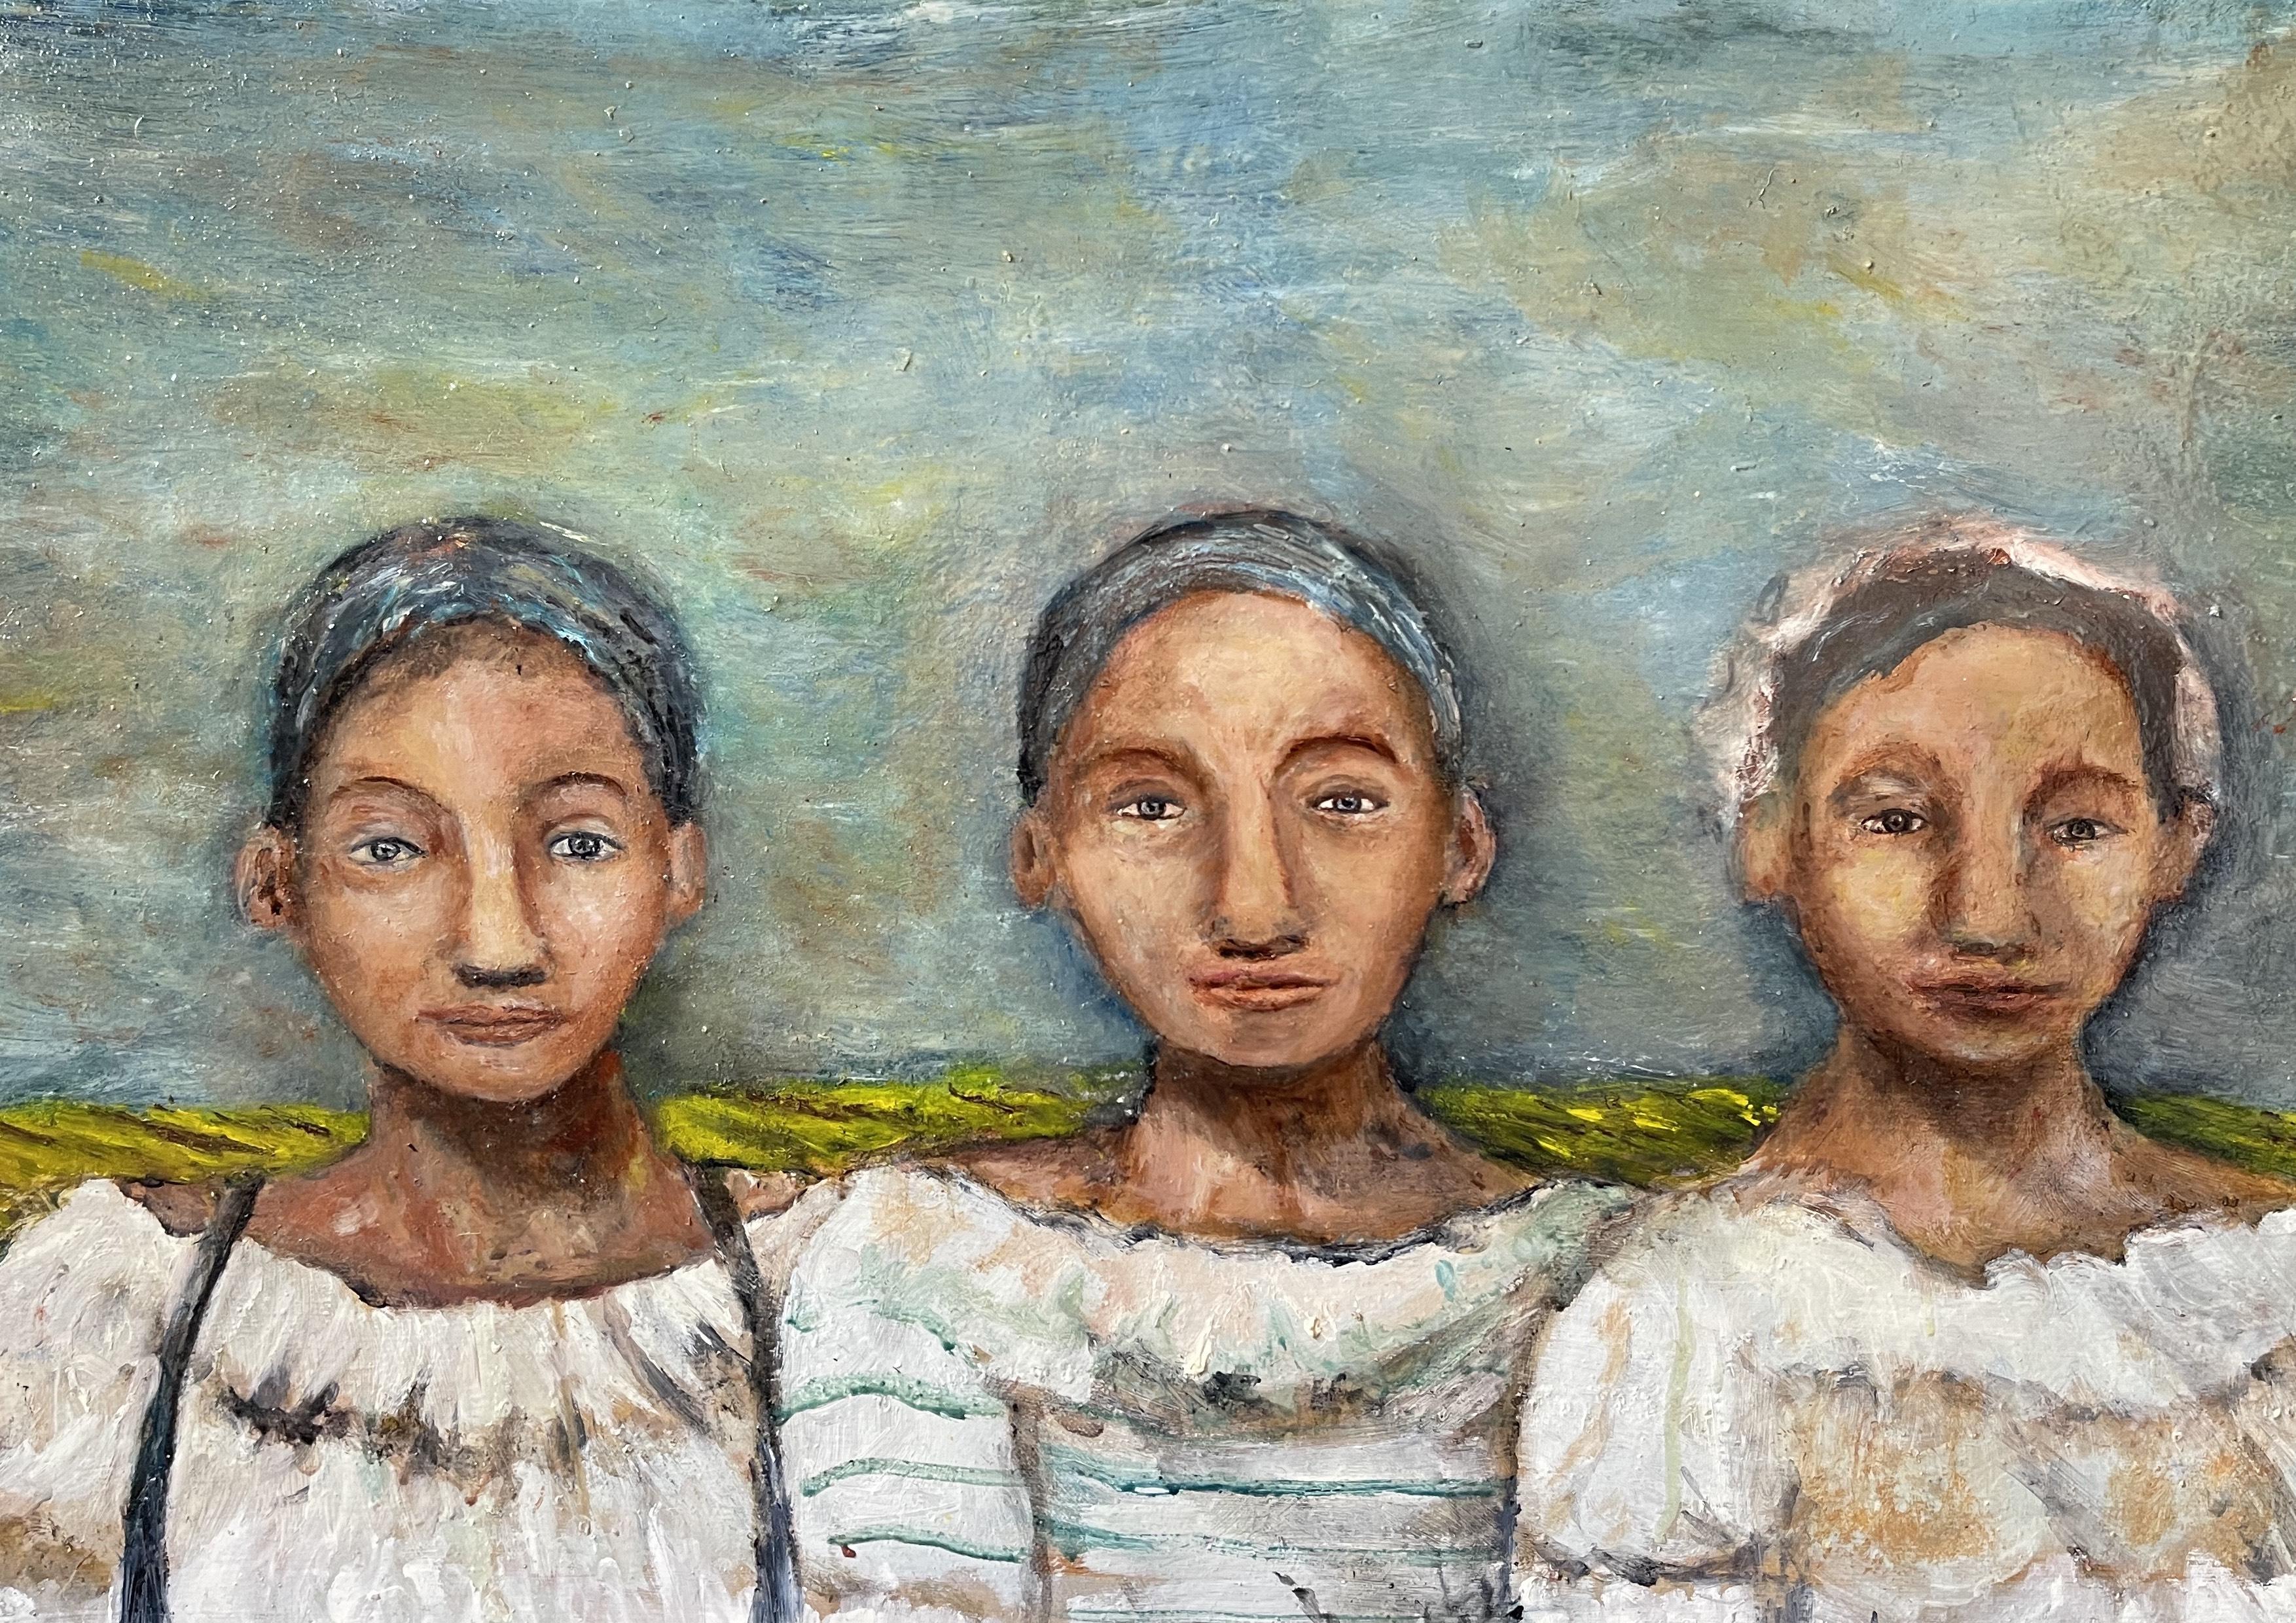 The 3 sisters - Elodie Huré
Oil on canvas
2021
75x45cm

Visual artist, videographer and collagist, also trained at the theater school, Elodie Huré expresses herself mainly through painting. With movement as a constant and common denominator,